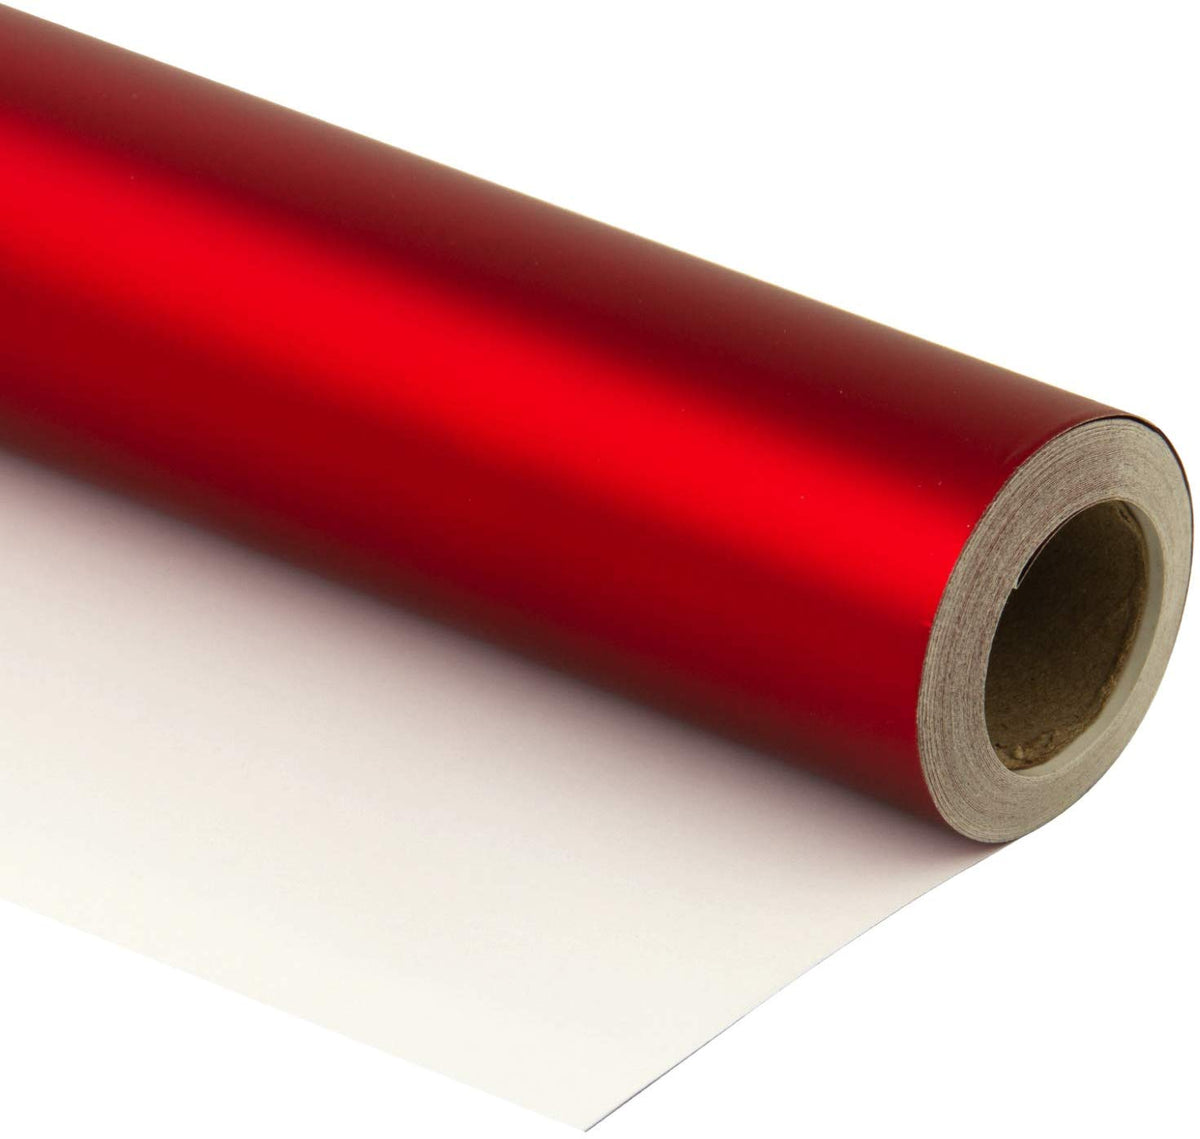 Matte Red Gift Wrap Rolls 5 ft x 30 in (8 Pieces)